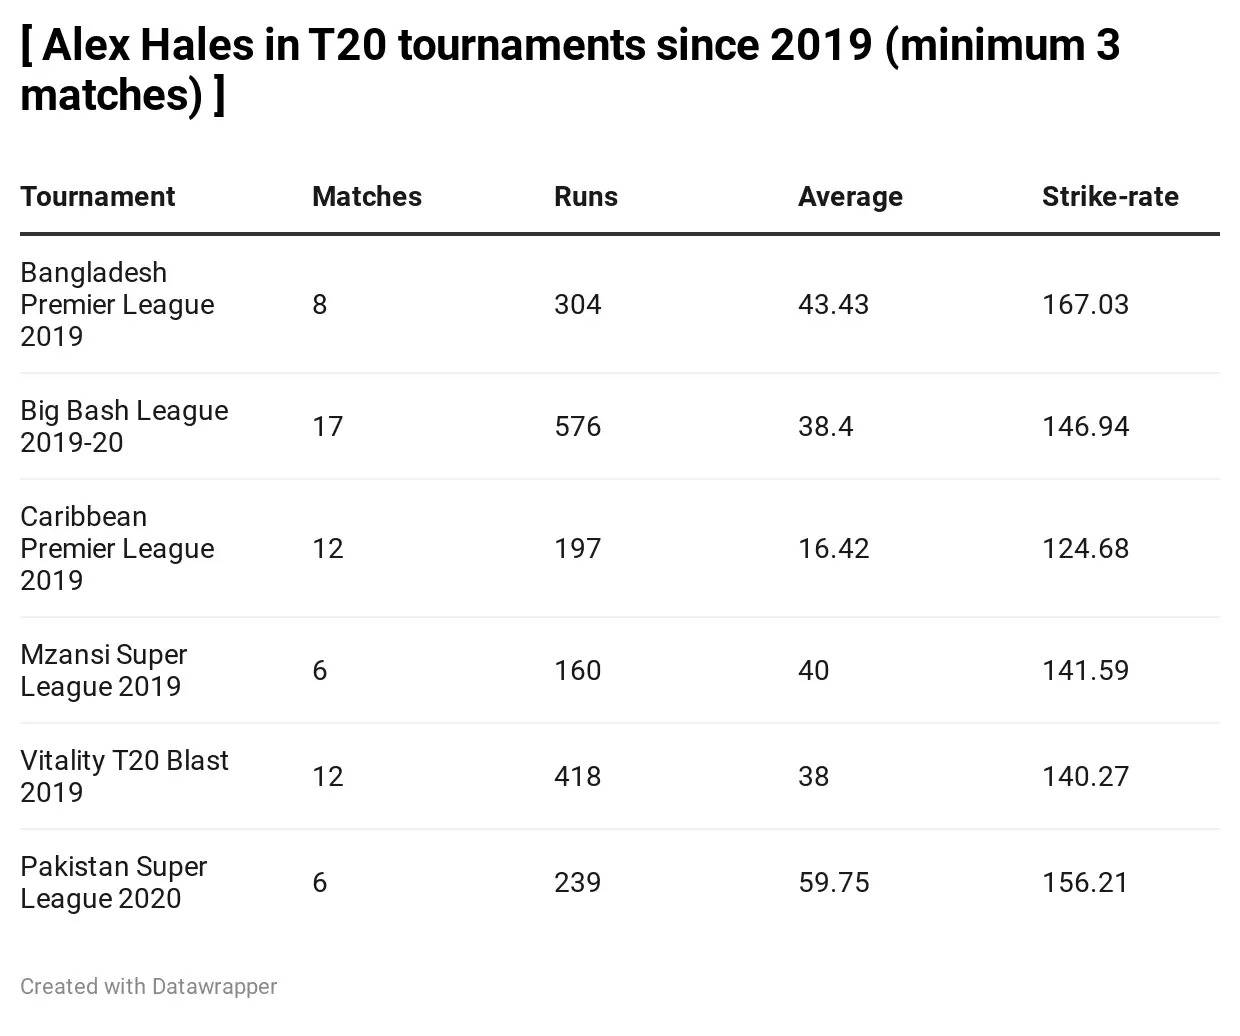 England’s Alex Hales Conundrum – Should Morgan and Co give him another chance?